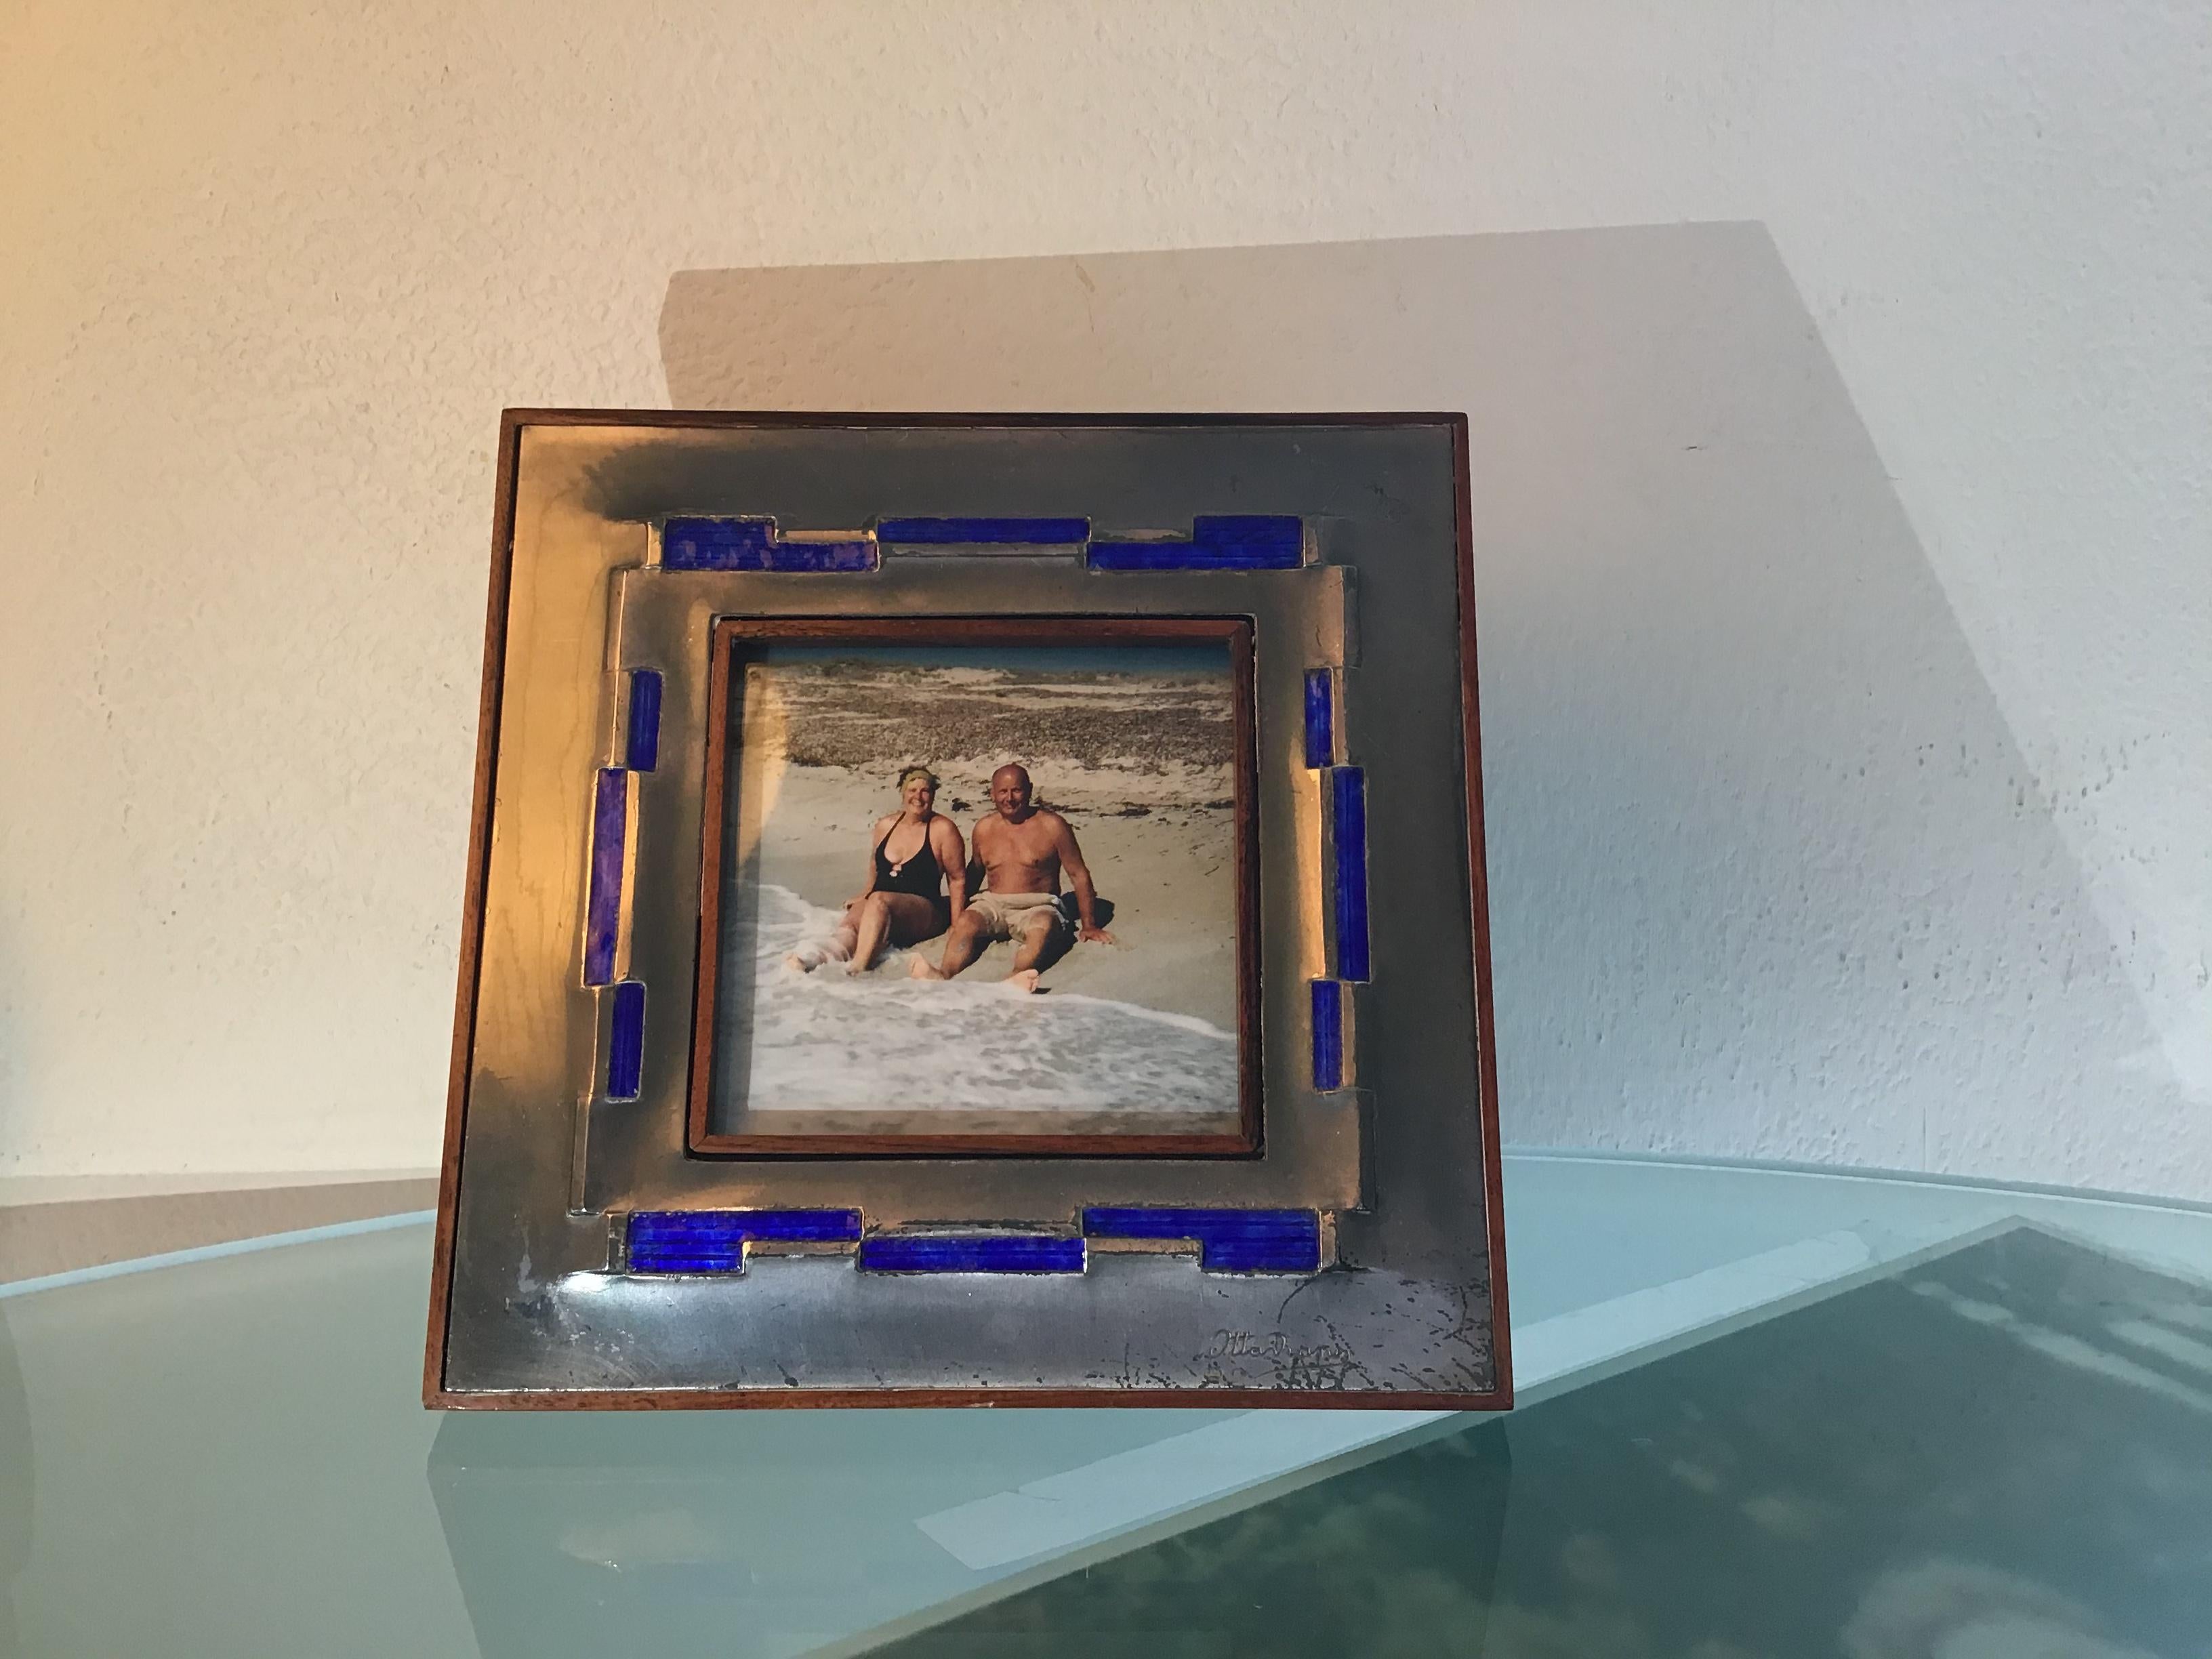 Ottaviani Pucture Frame 925 Silver Enamelled Copper Wood 1960 Italy For Sale 10